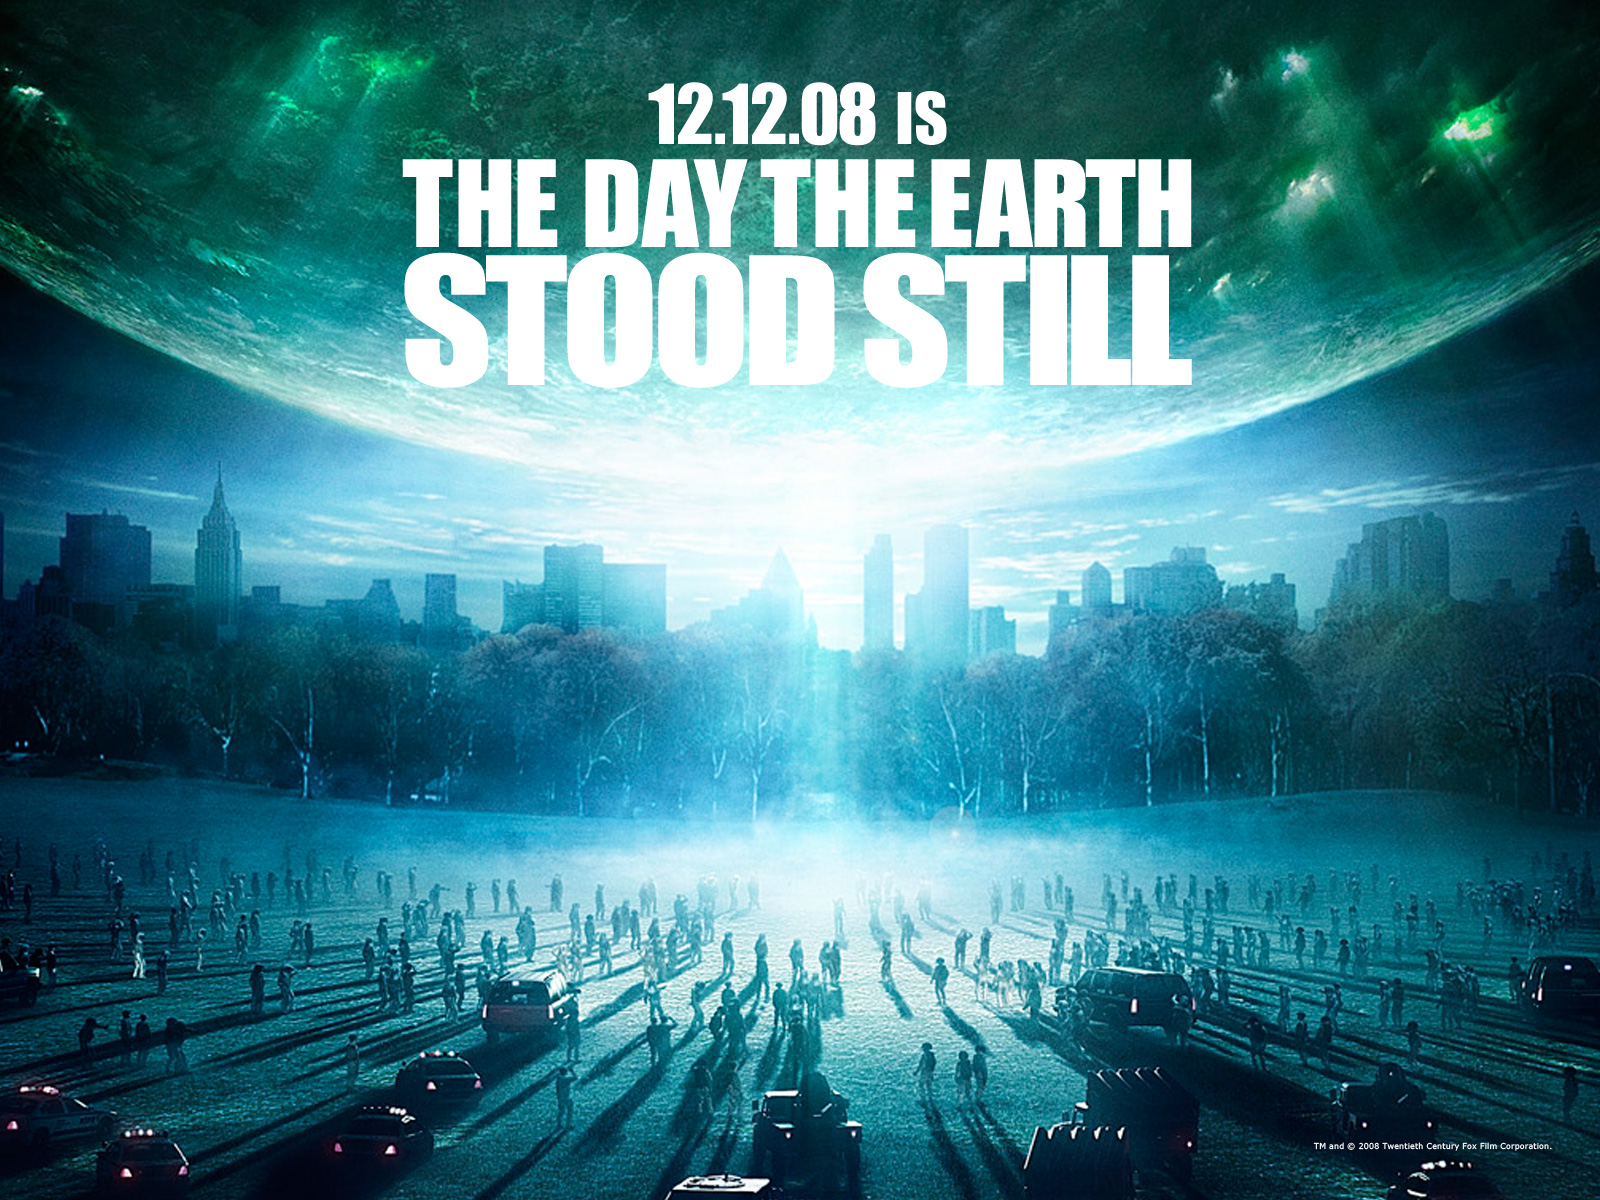 Download High quality The Day The Earth Stood Still wallpaper / Movies / 1600x1200